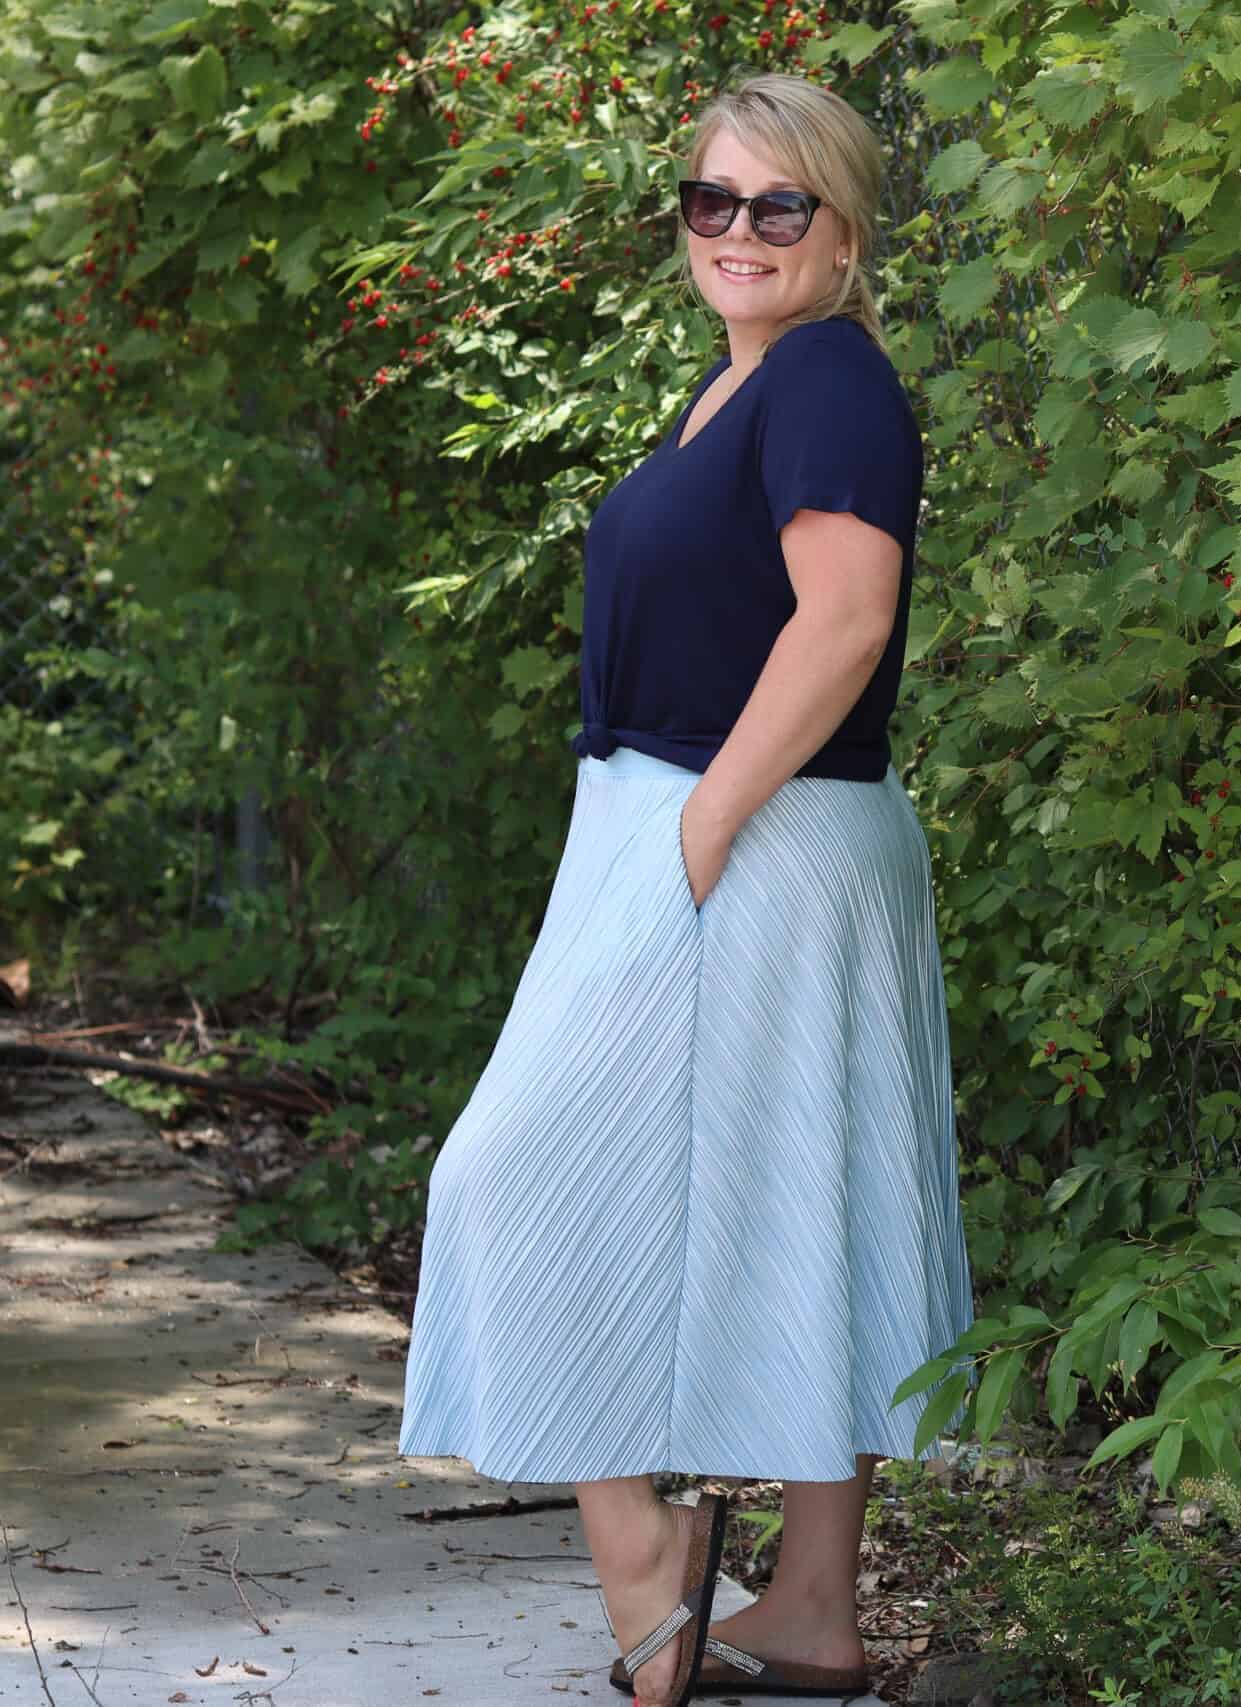 Sybil Skirt sewing pattern for ladies. Seven patterns in one! Download ...